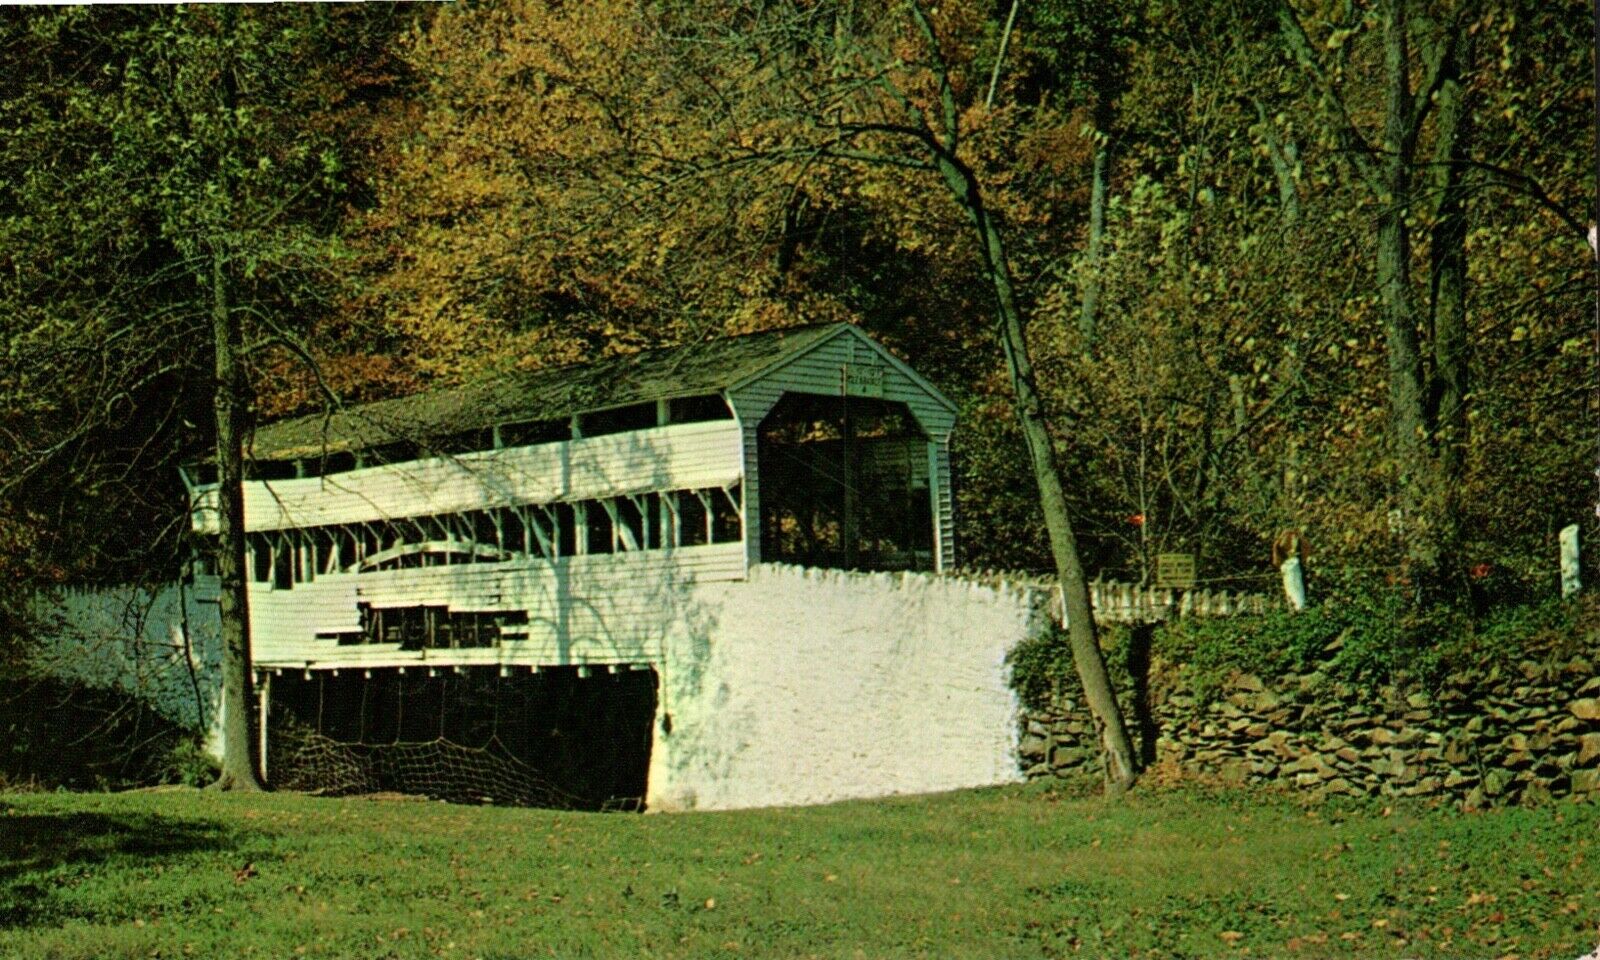 Postcard, Greetings from Cohick\'s Trading Post, Salladasburg, PA, Covered Bridge